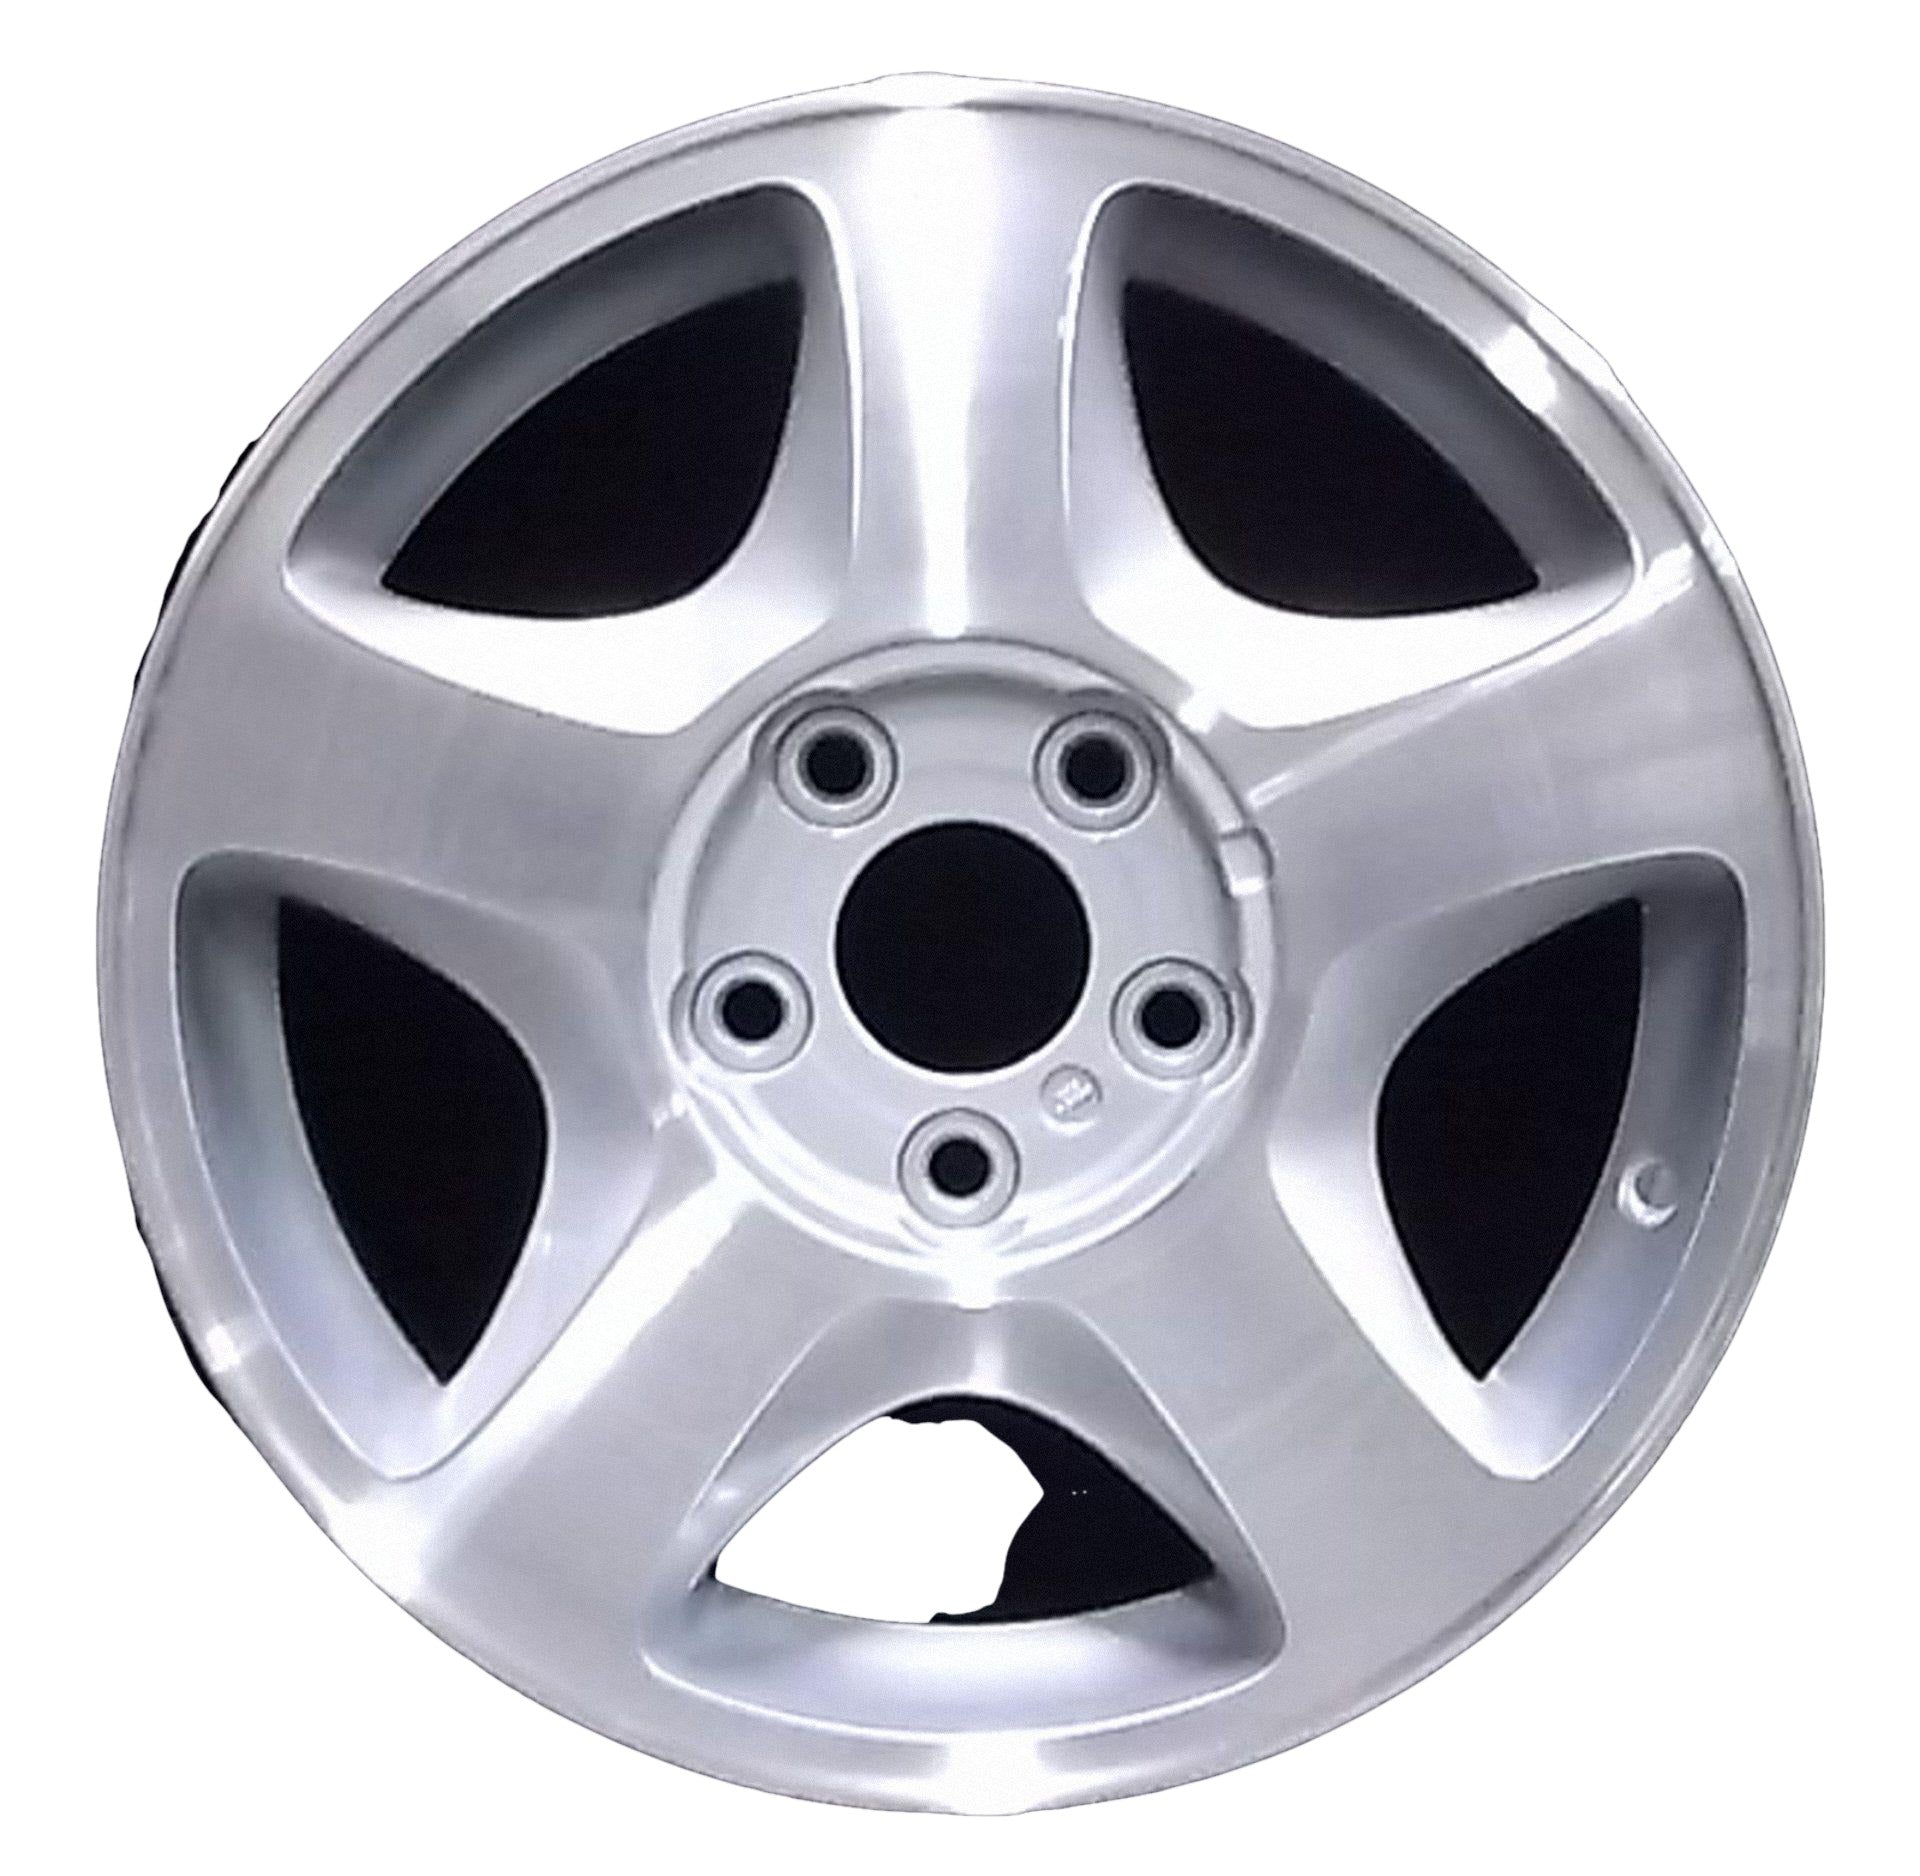 Nissan Quest  1999, 2000, 2001, 2002 Factory OEM Car Wheel Size 16x6 Alloy WAO.3321.PS08.MA